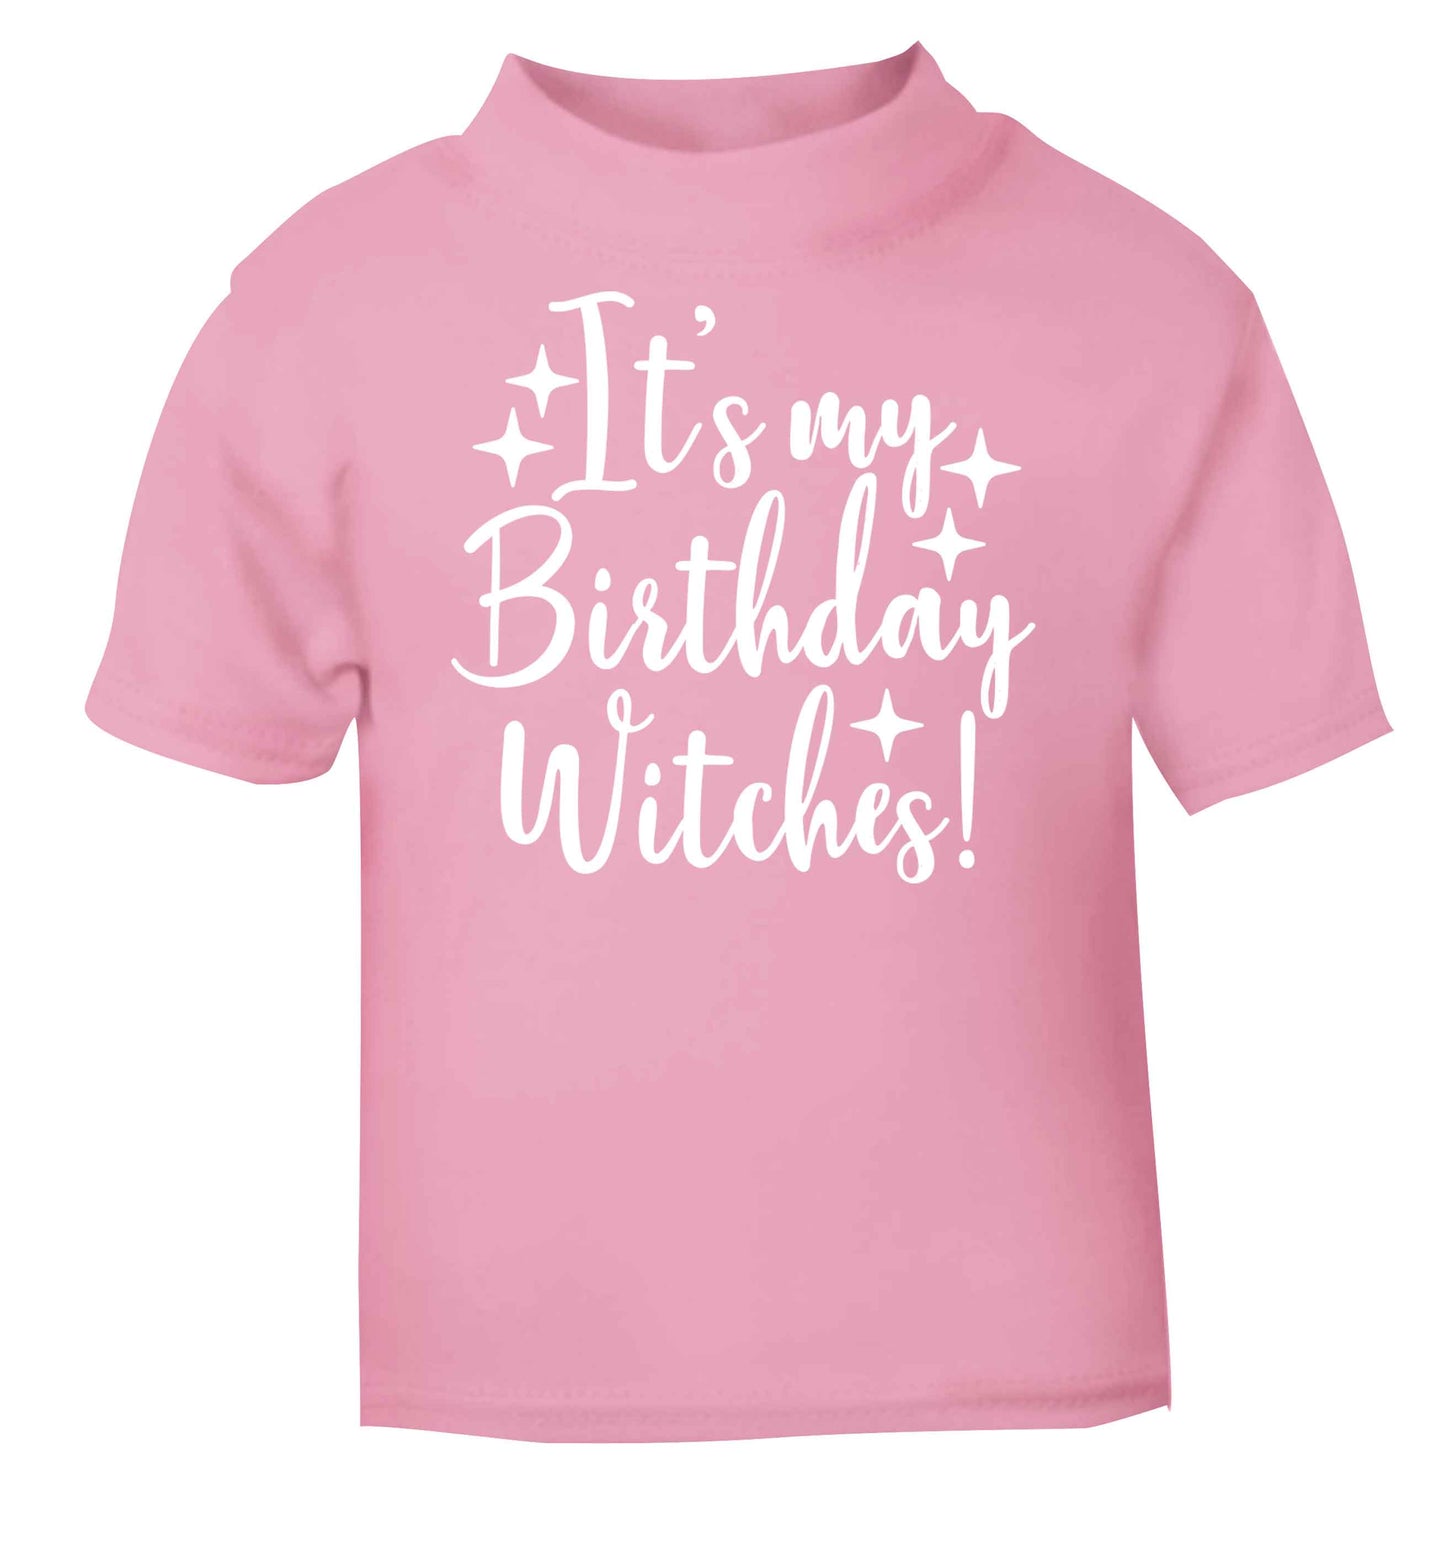 It's my birthday witches!light pink baby toddler Tshirt 2 Years